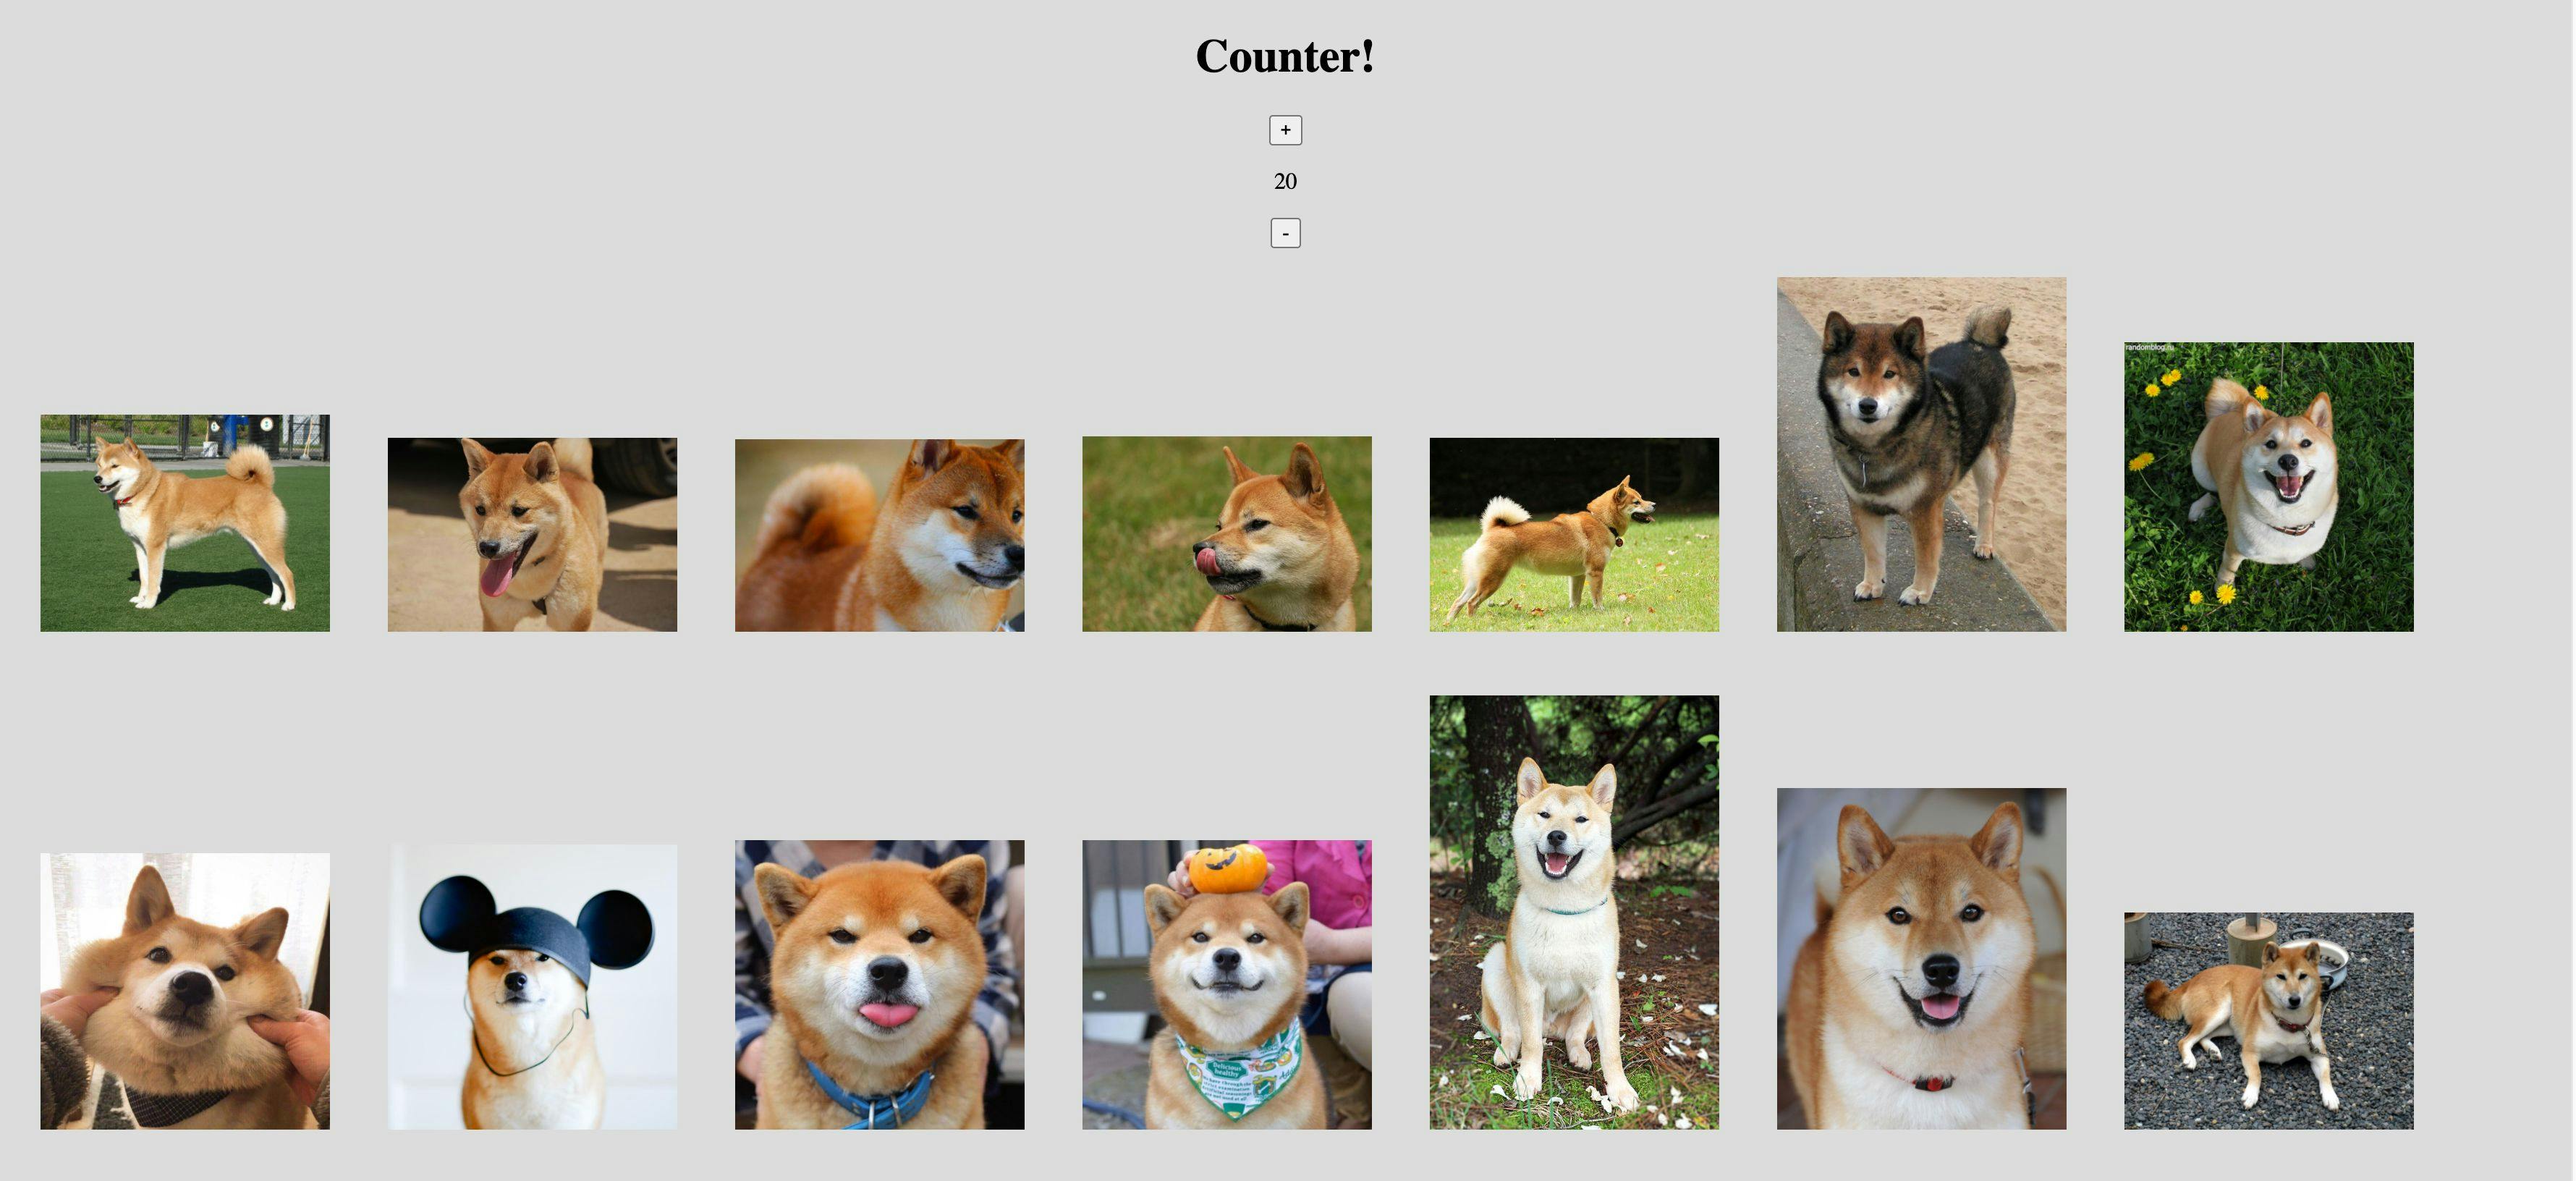 /how-to-immediately-update-components-based-on-user-interaction-with-reactredux feature image